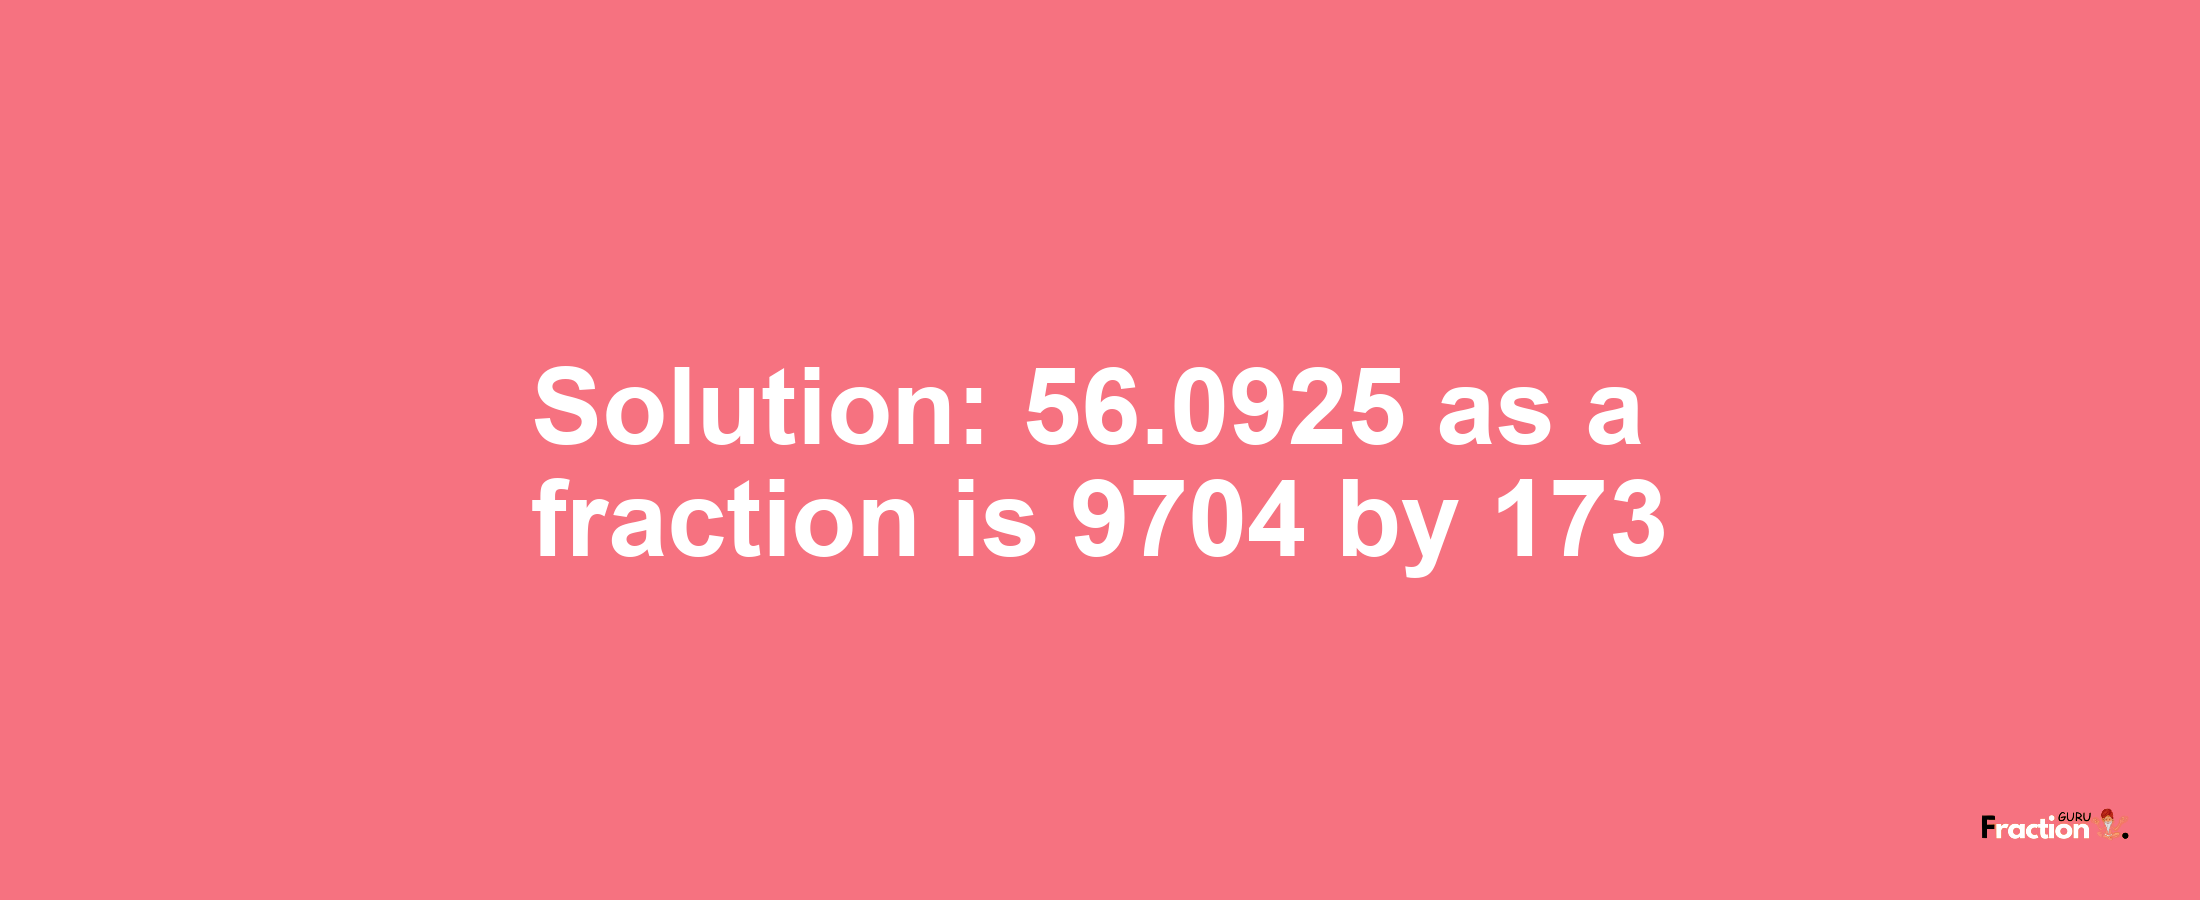 Solution:56.0925 as a fraction is 9704/173